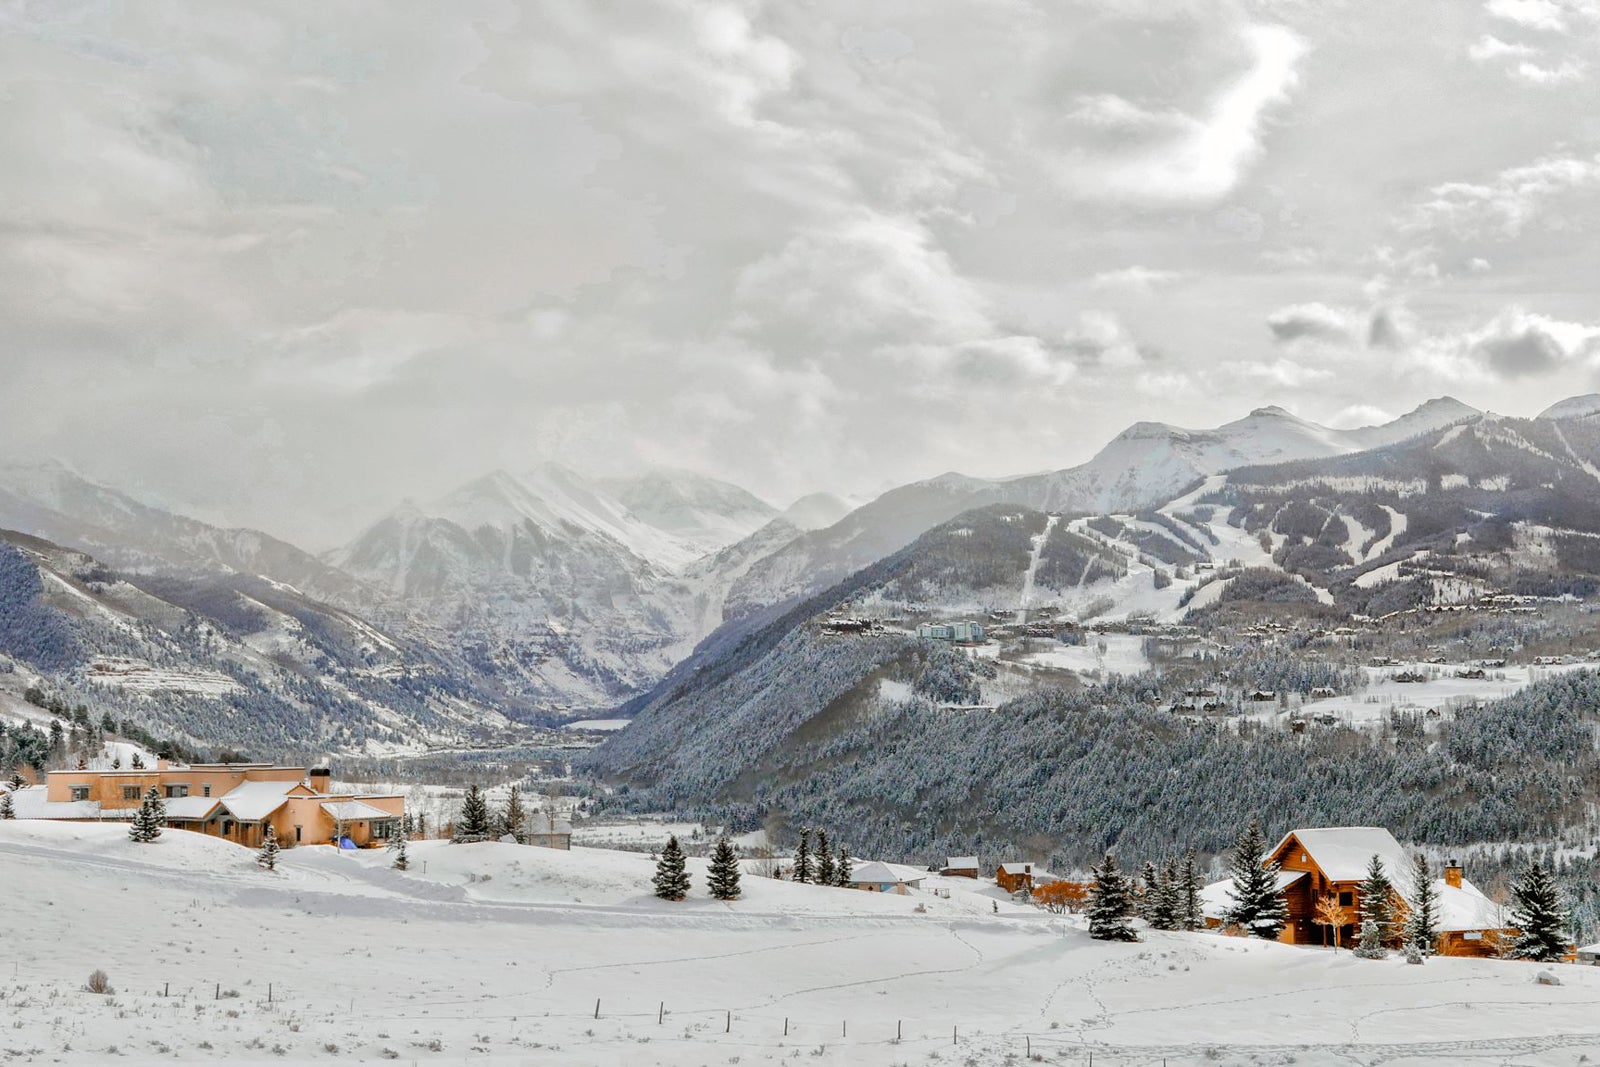 11 of the best ski resorts for the holidays